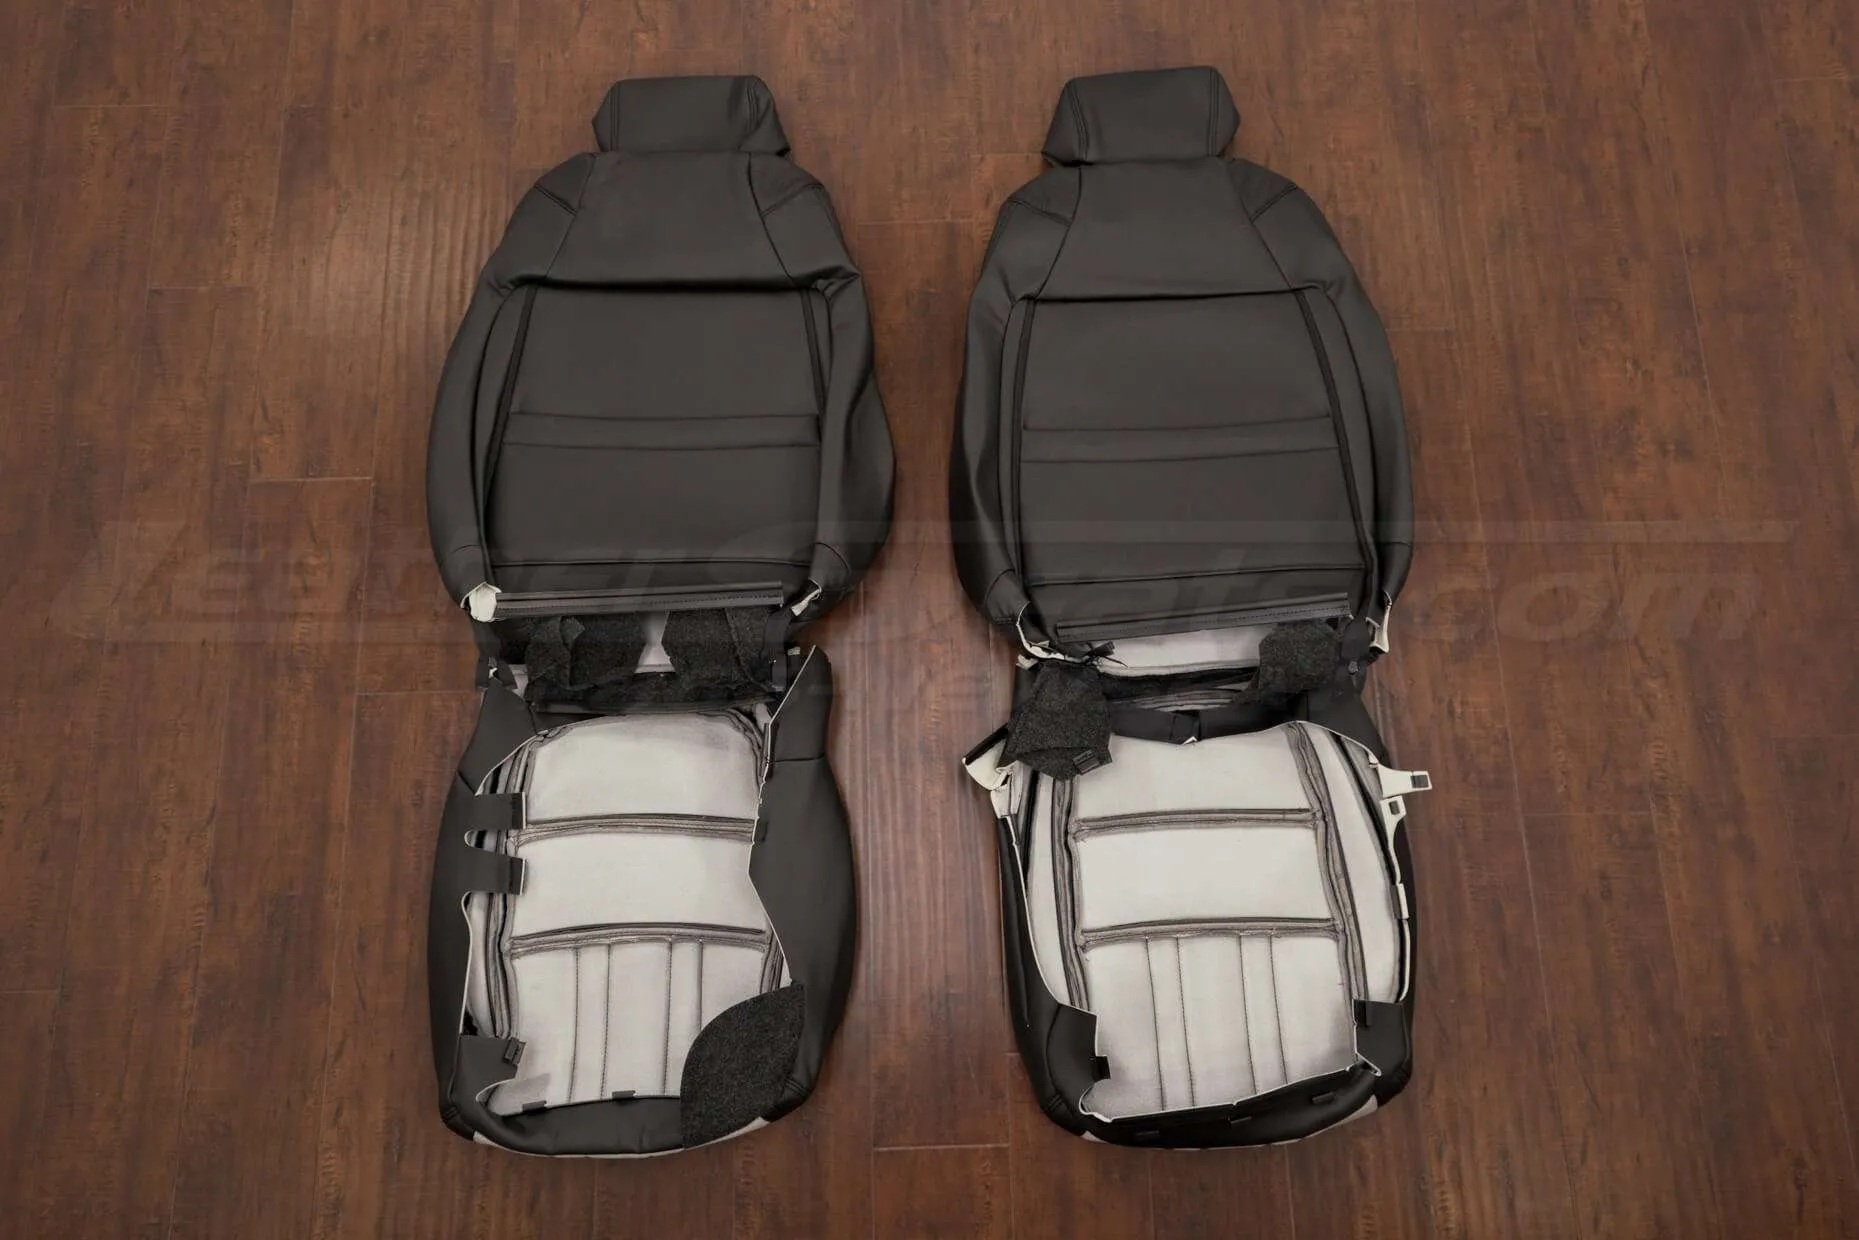 18-21 Honda Accord Leather Kit - Black & Dove Grey - Back side of front seats